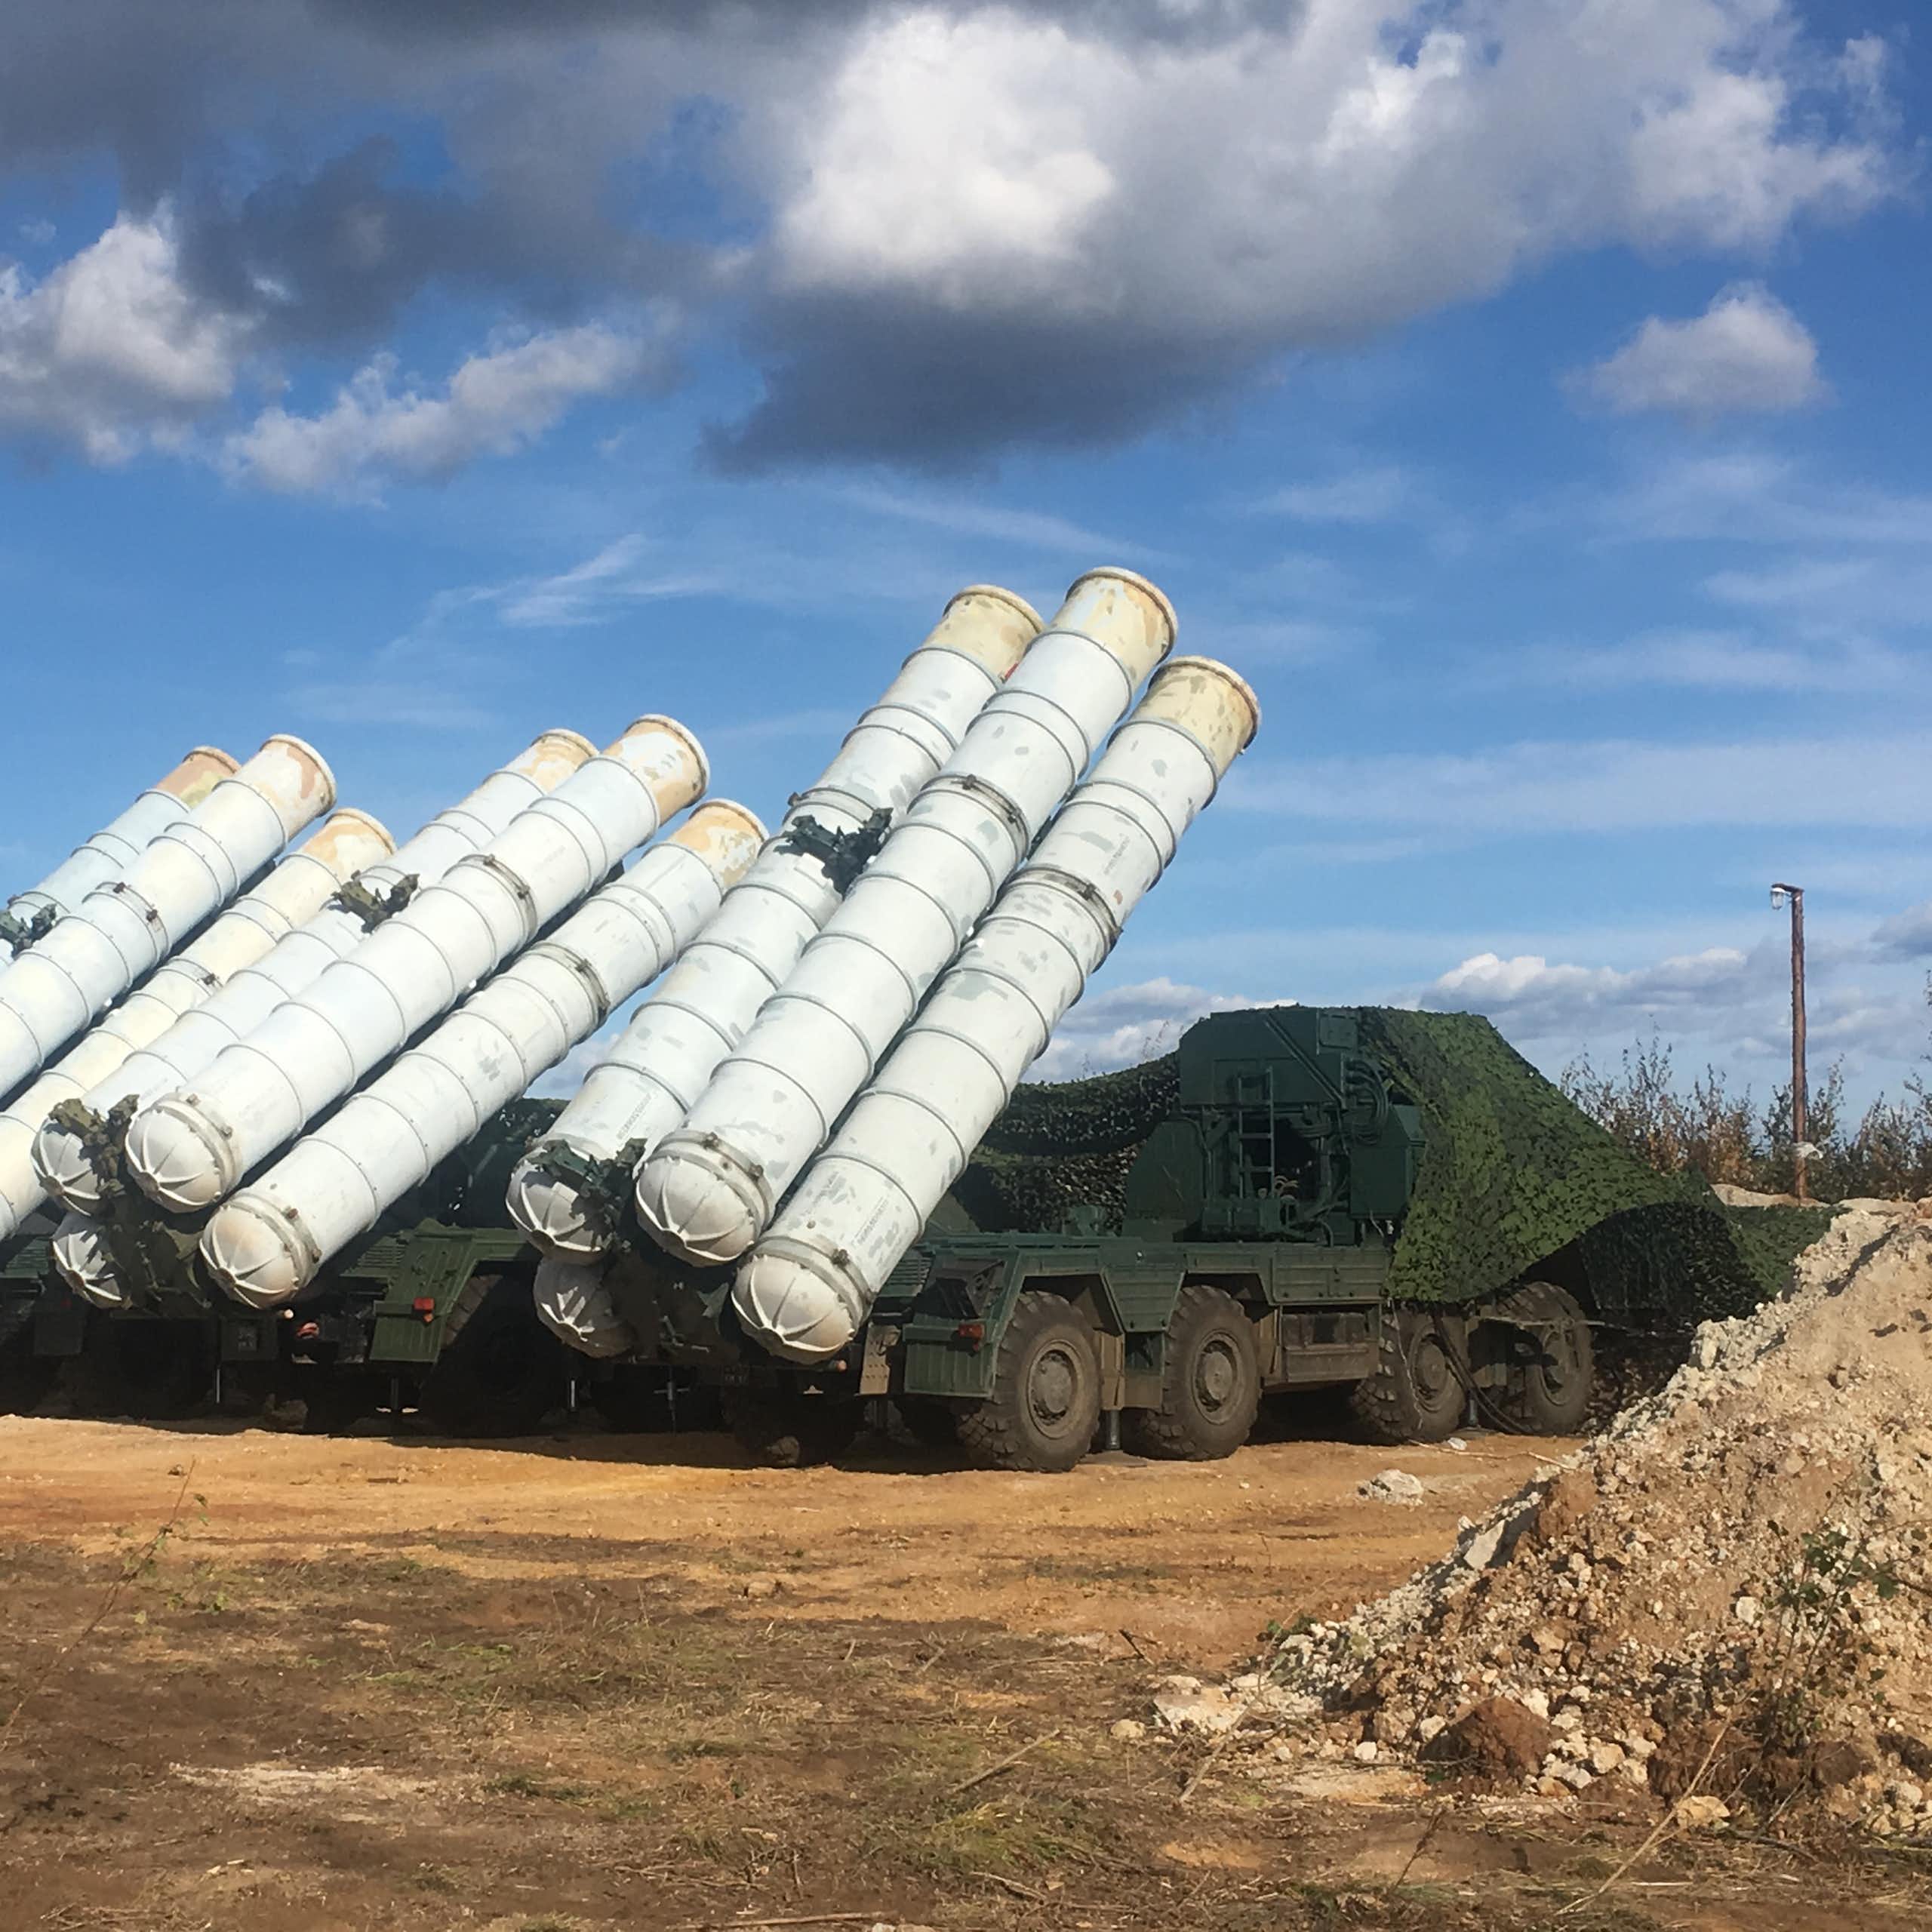 Photo of a large truck with several missiles on its back.